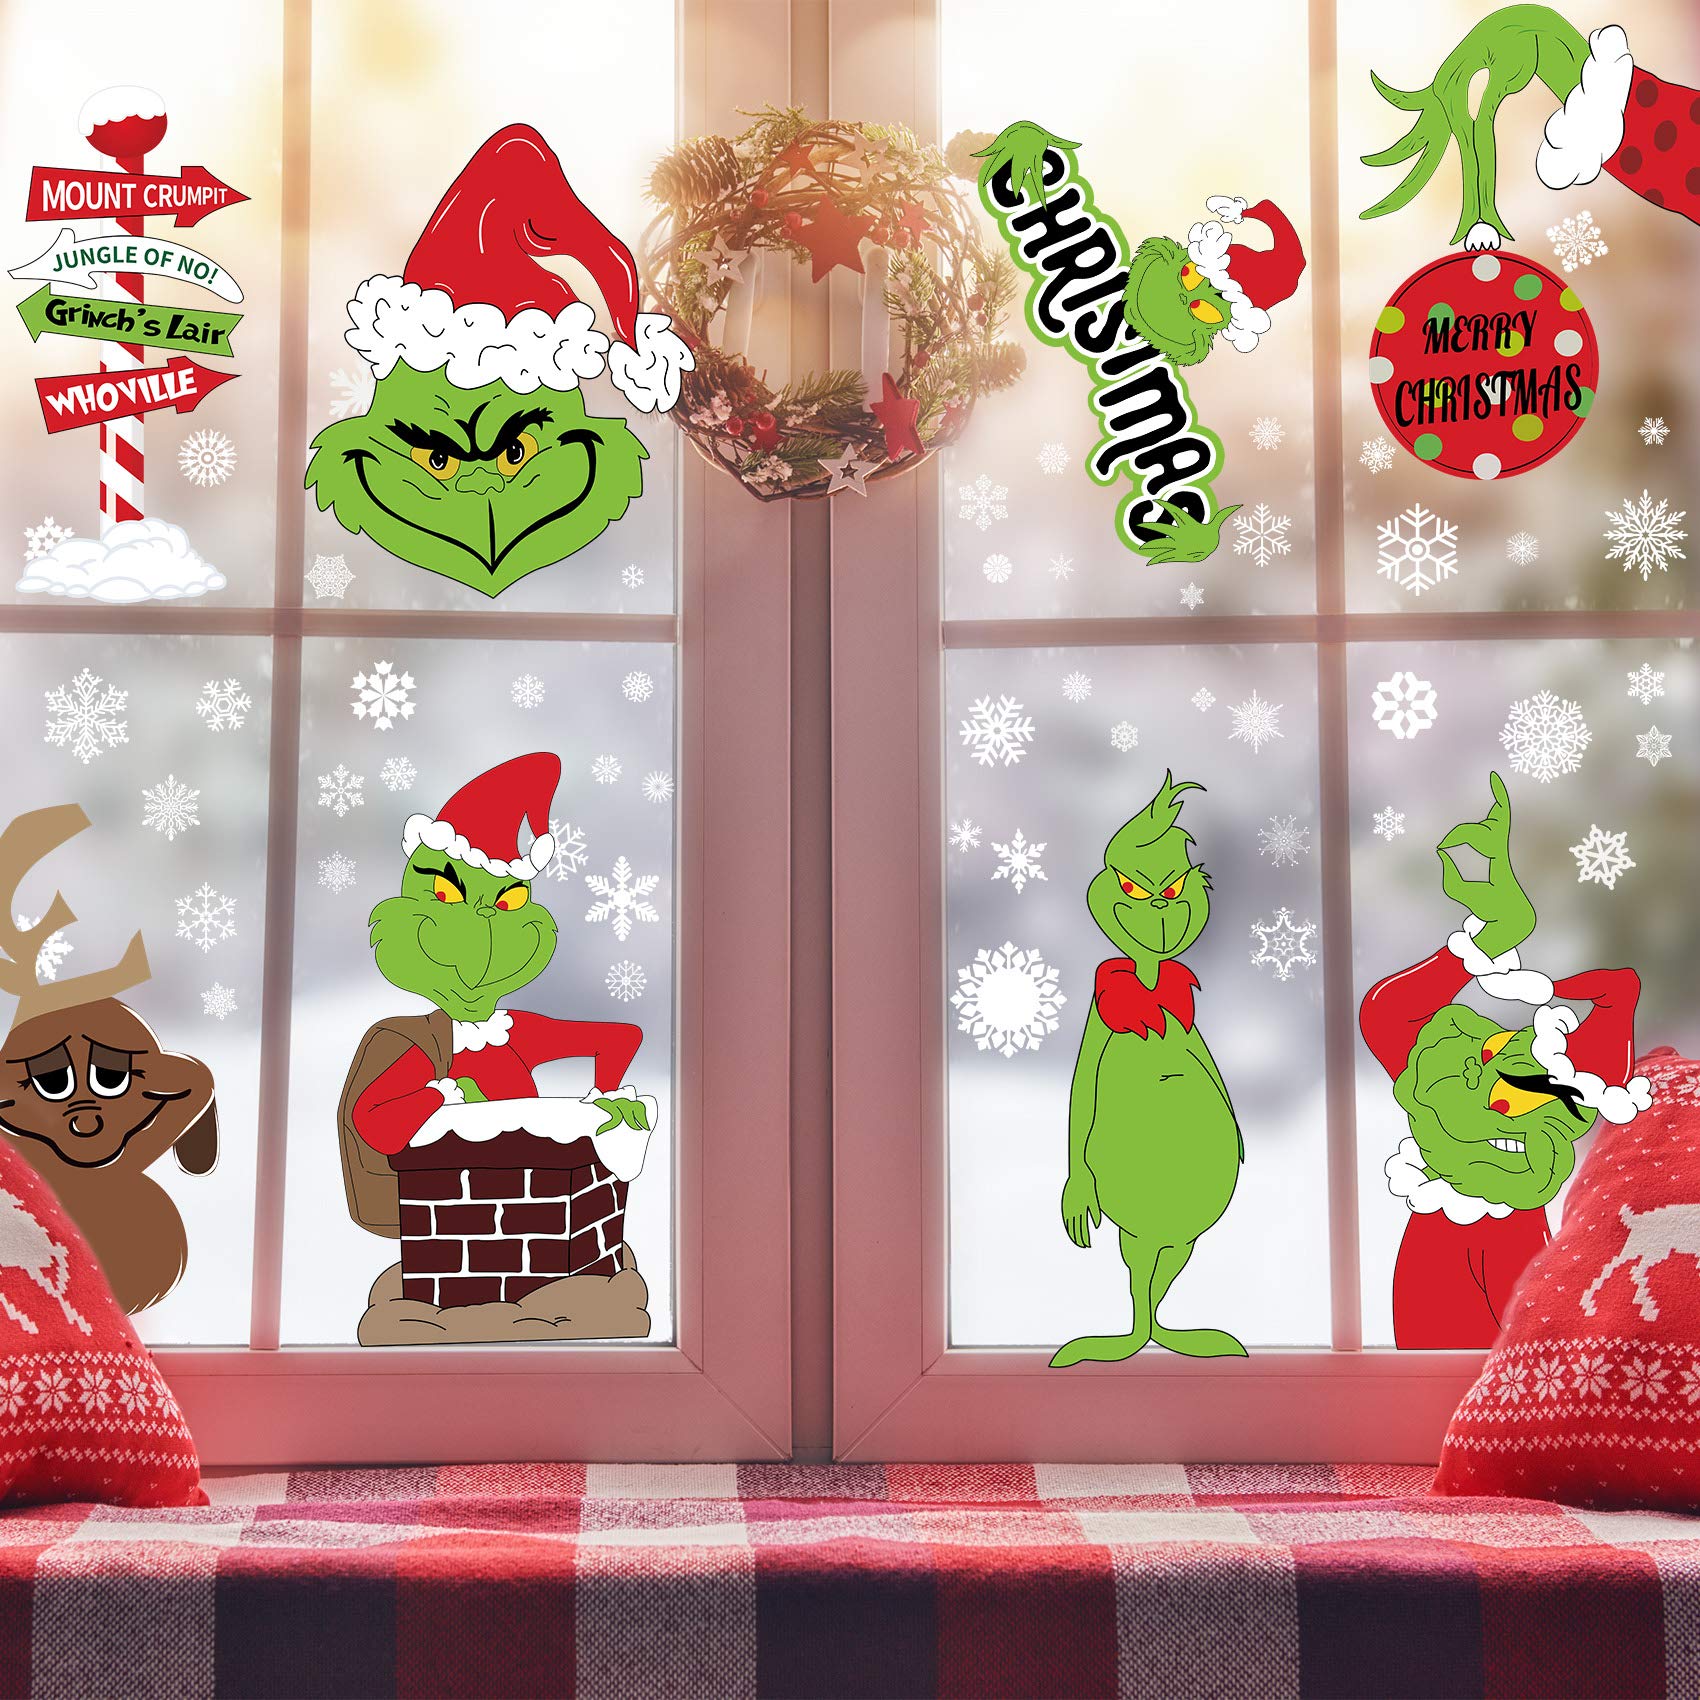 Grinch Window Clings Christmas Decorations Grinch stickers Decal Home School Off 